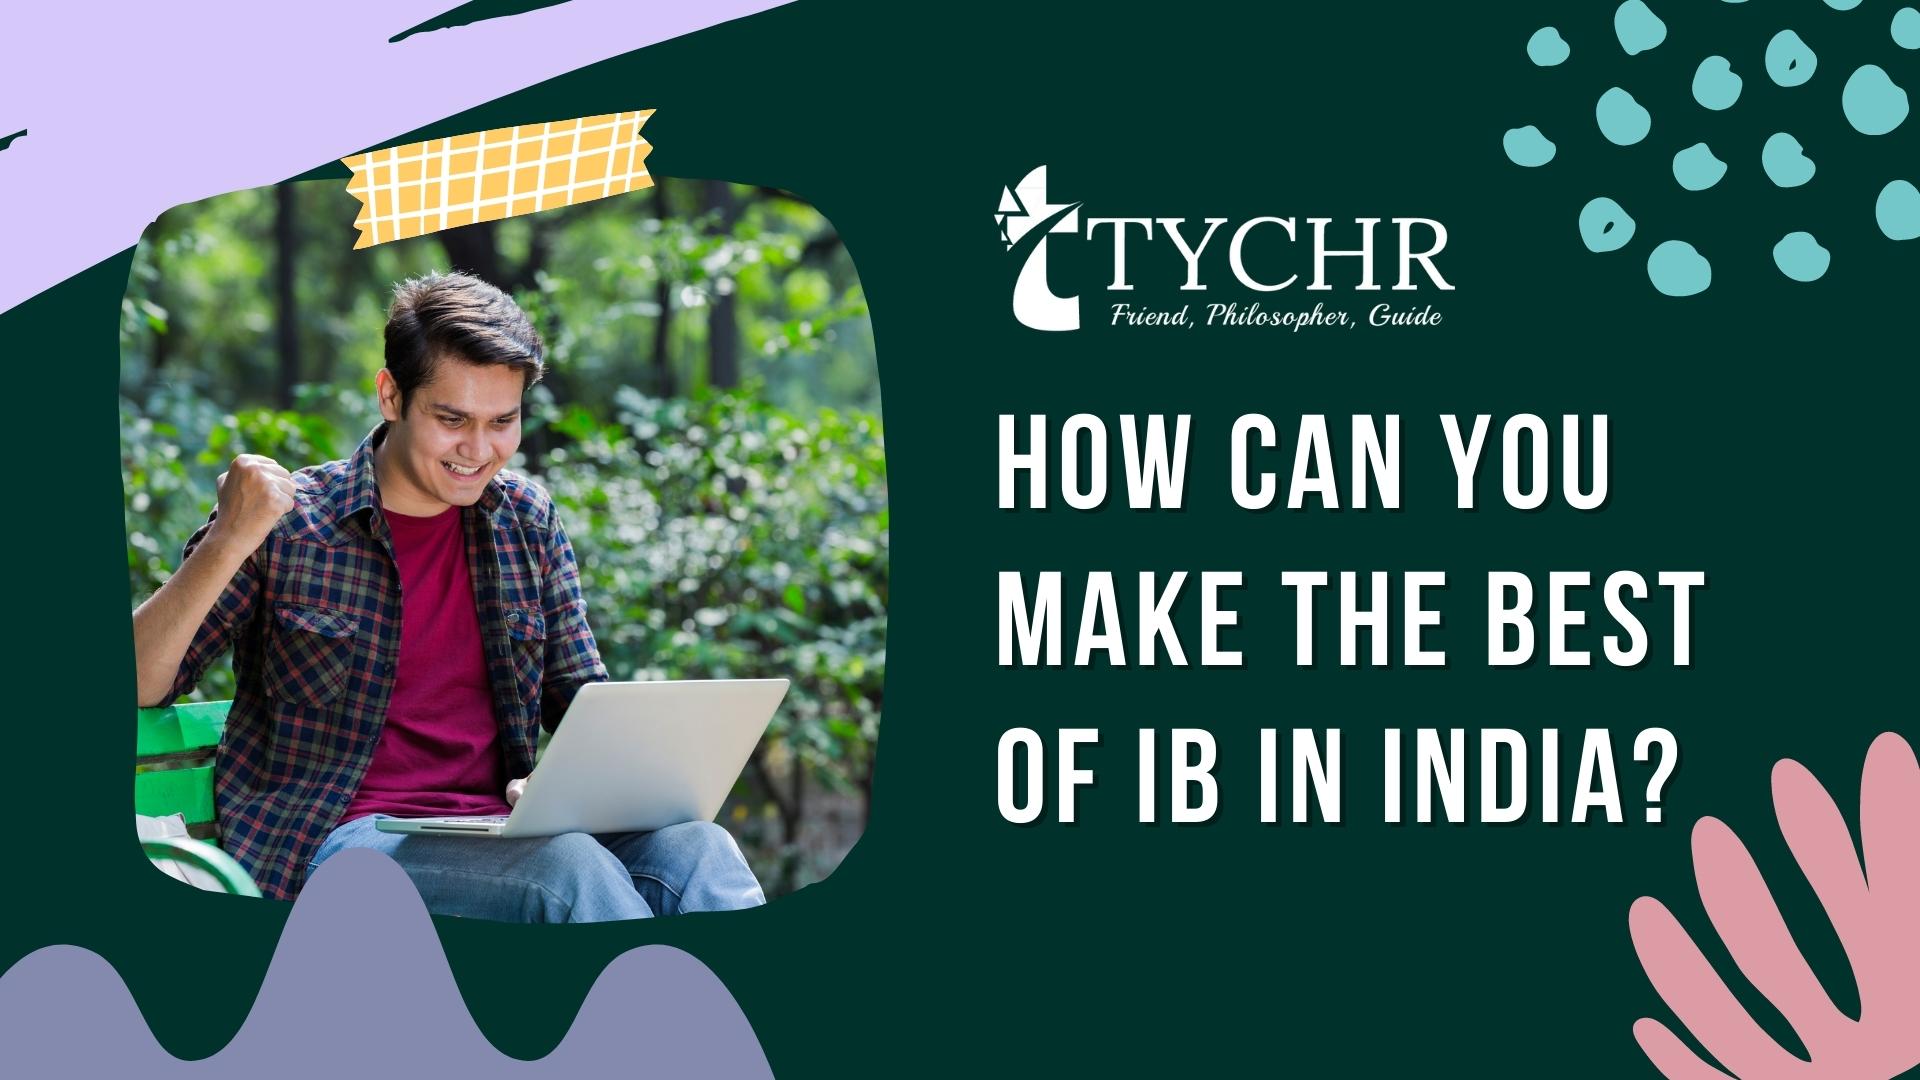 How can you make best of IB in India